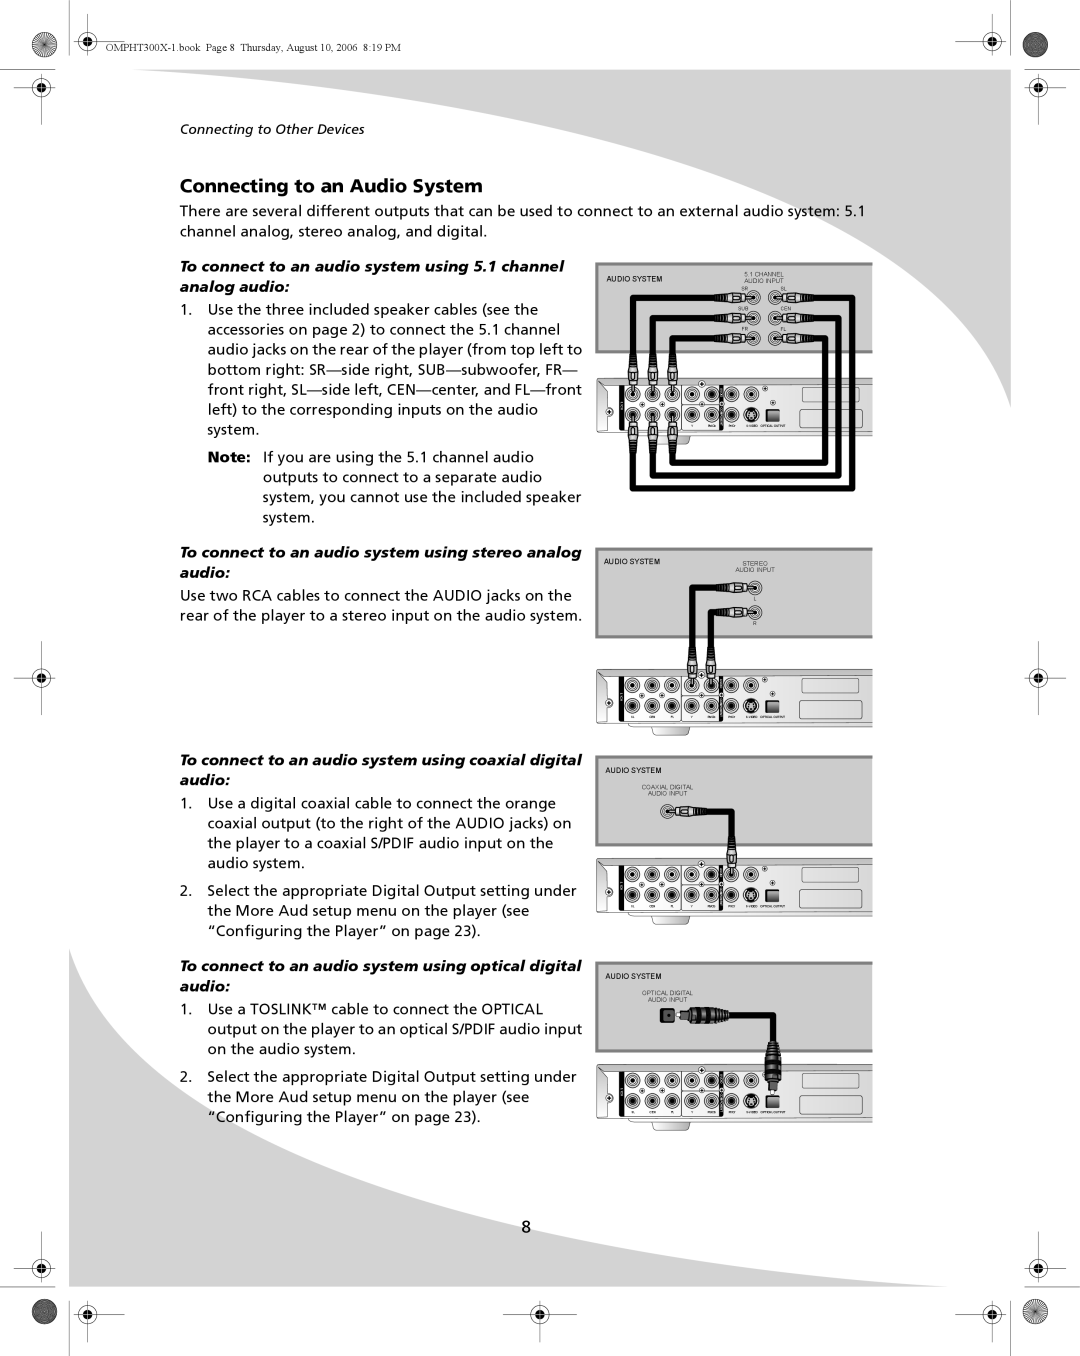 SpectronIQ PHT-300X user manual Connecting to an Audio System 